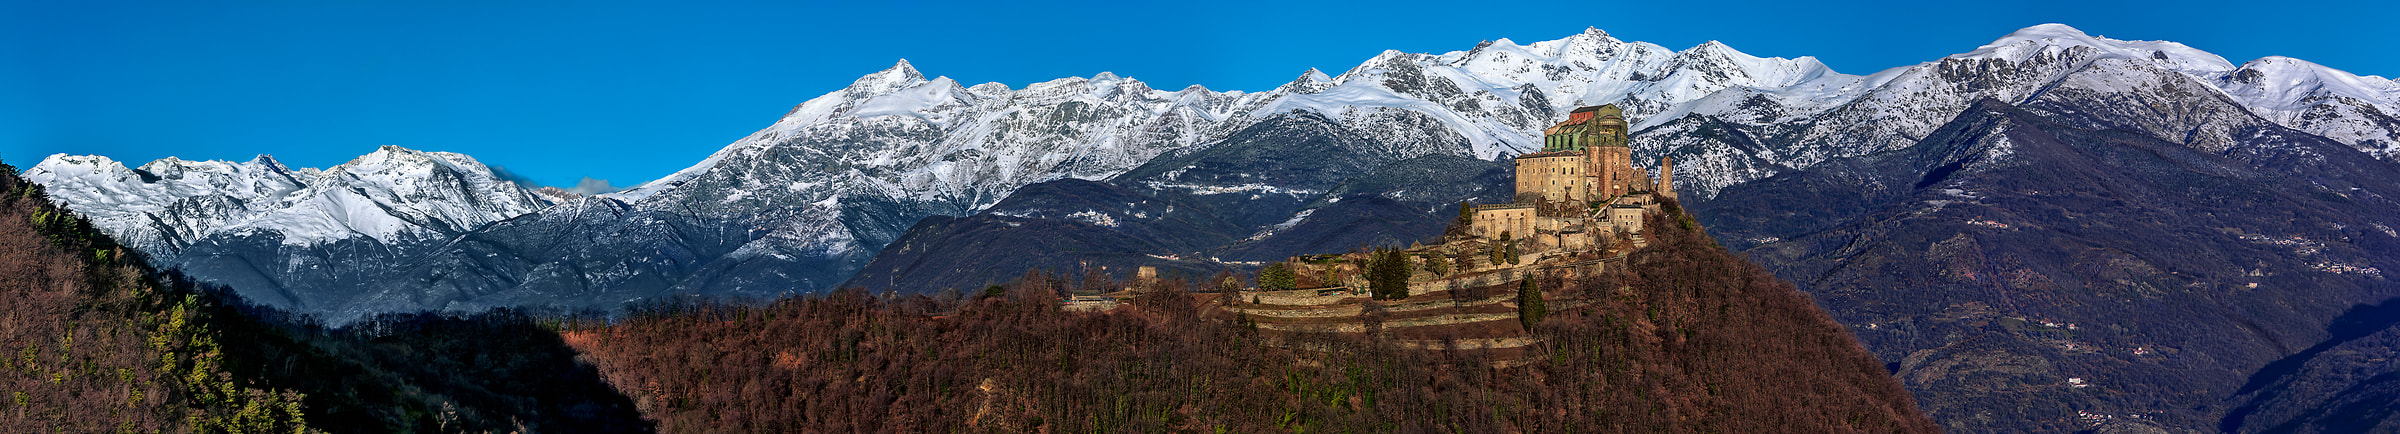 540 megapixels! A very high resolution, large-format VAST photo print of a church amid the mountains of the Alps; landscape panorama photograph created by Duilio Fiorille in Sant'Ambrogio di Torino, Piedmont, Italy.